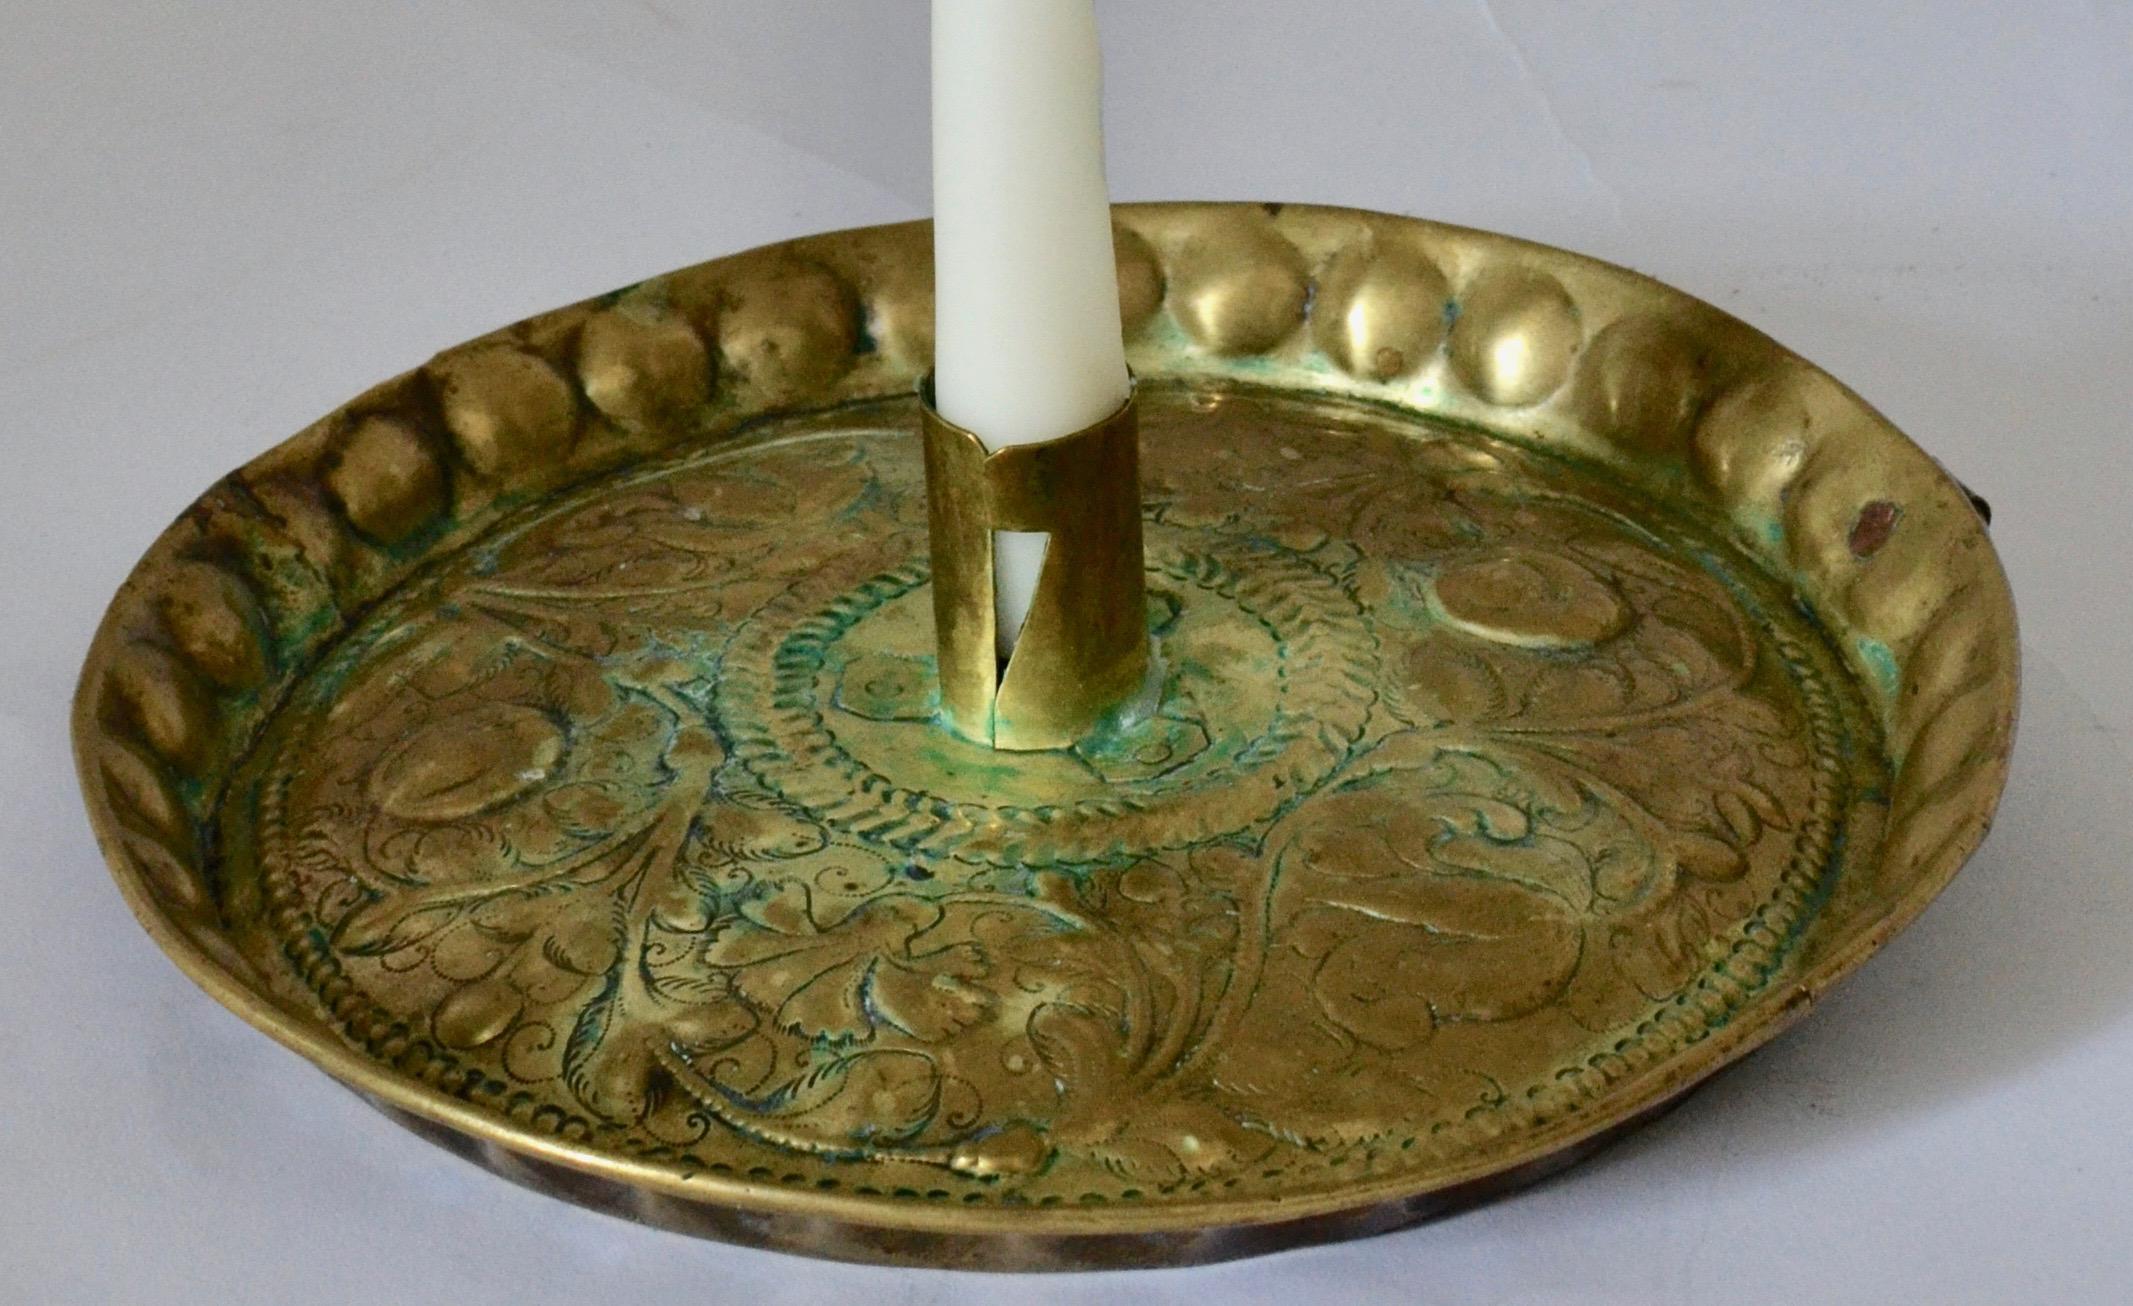 A Swedish 18th century brass candlestick with floral decoration.